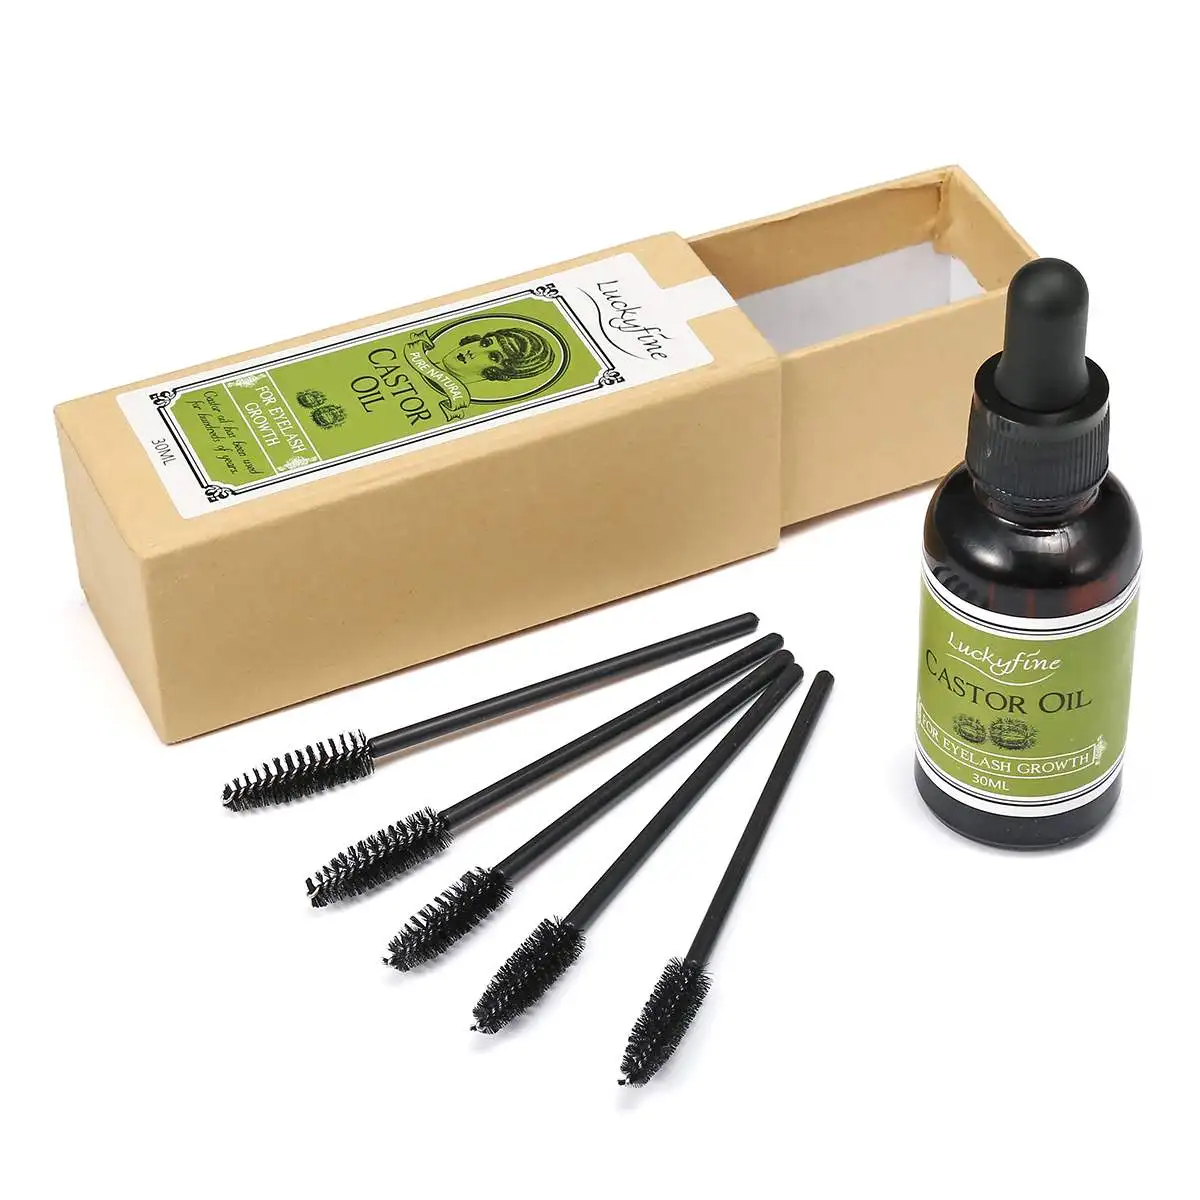 

30ml 100% Pure Organic Castor Oil Vitamin E Eyebrows Growth Cold-Pressed Natural Eyelash Hexane-freel with 5 Mascara Brushes